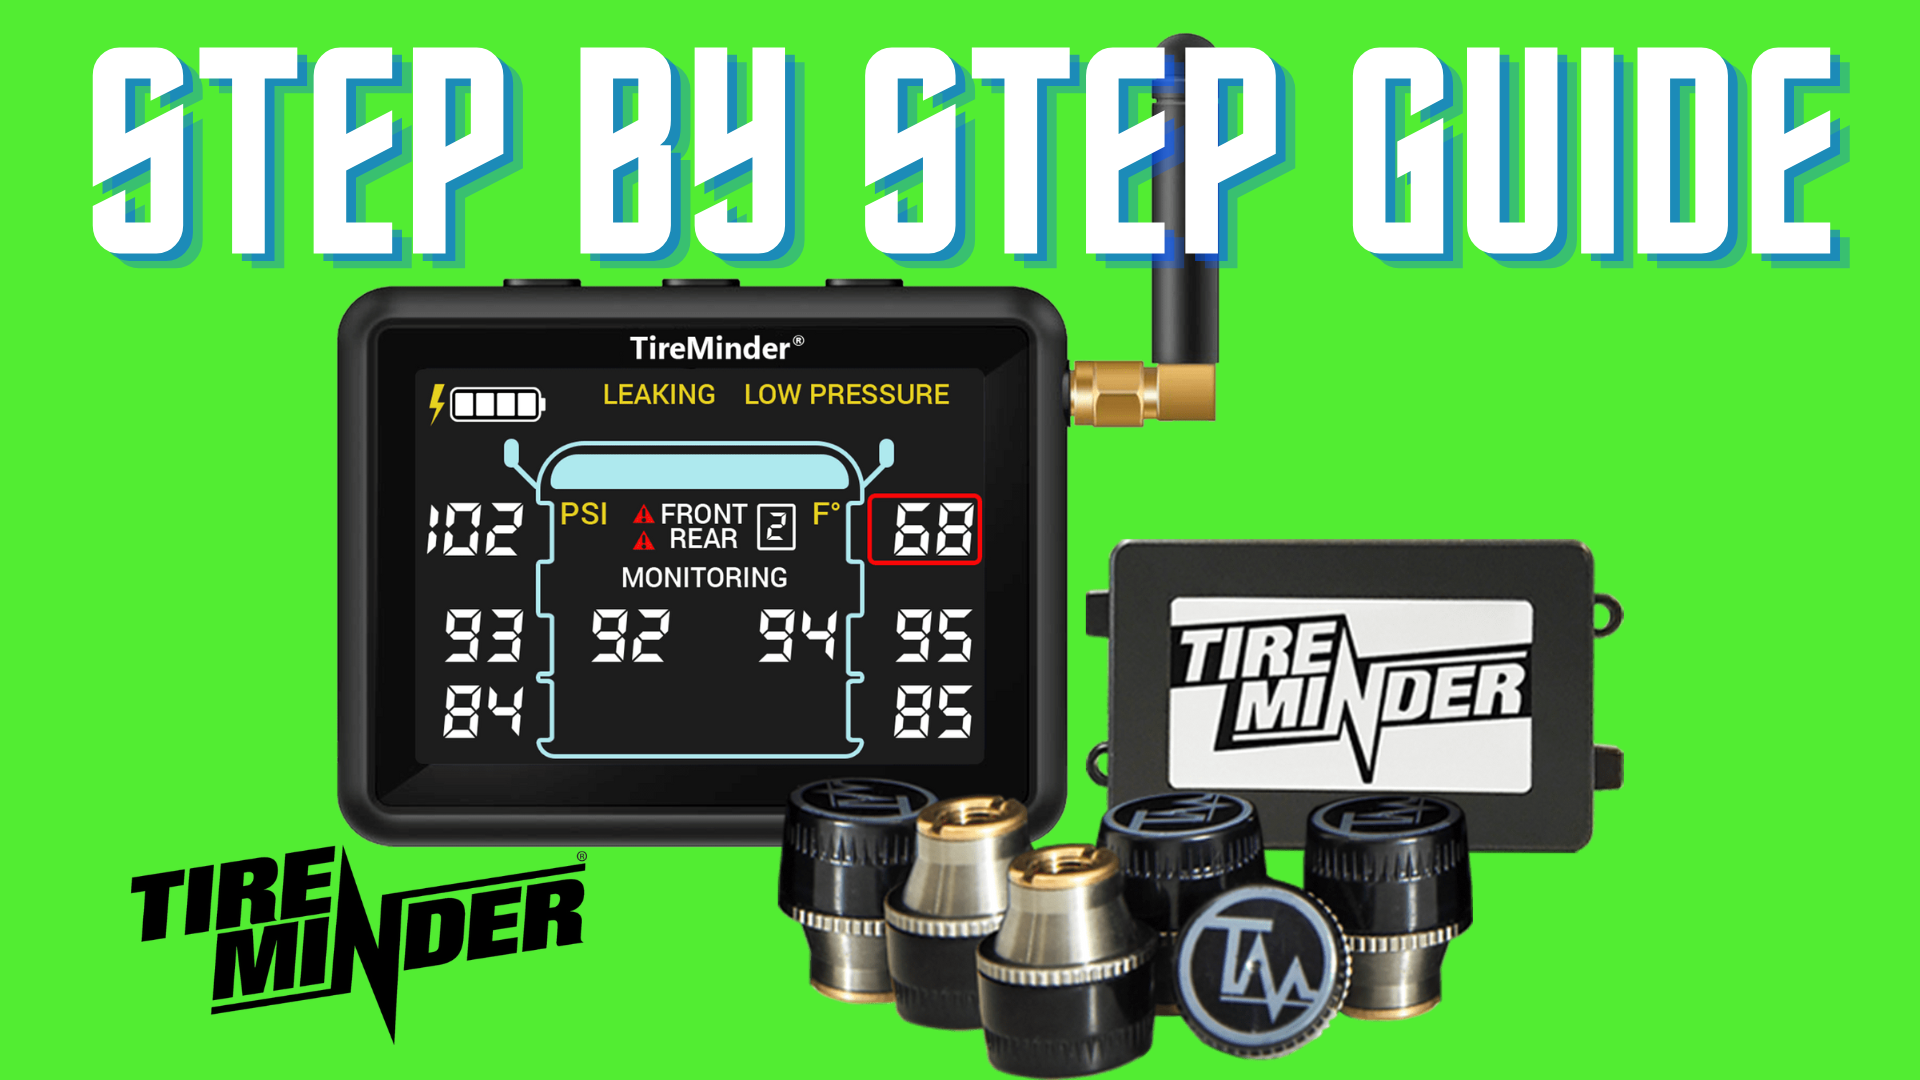 Here is a step-by-step guide to installing a TireMinder tire pressure monitor system